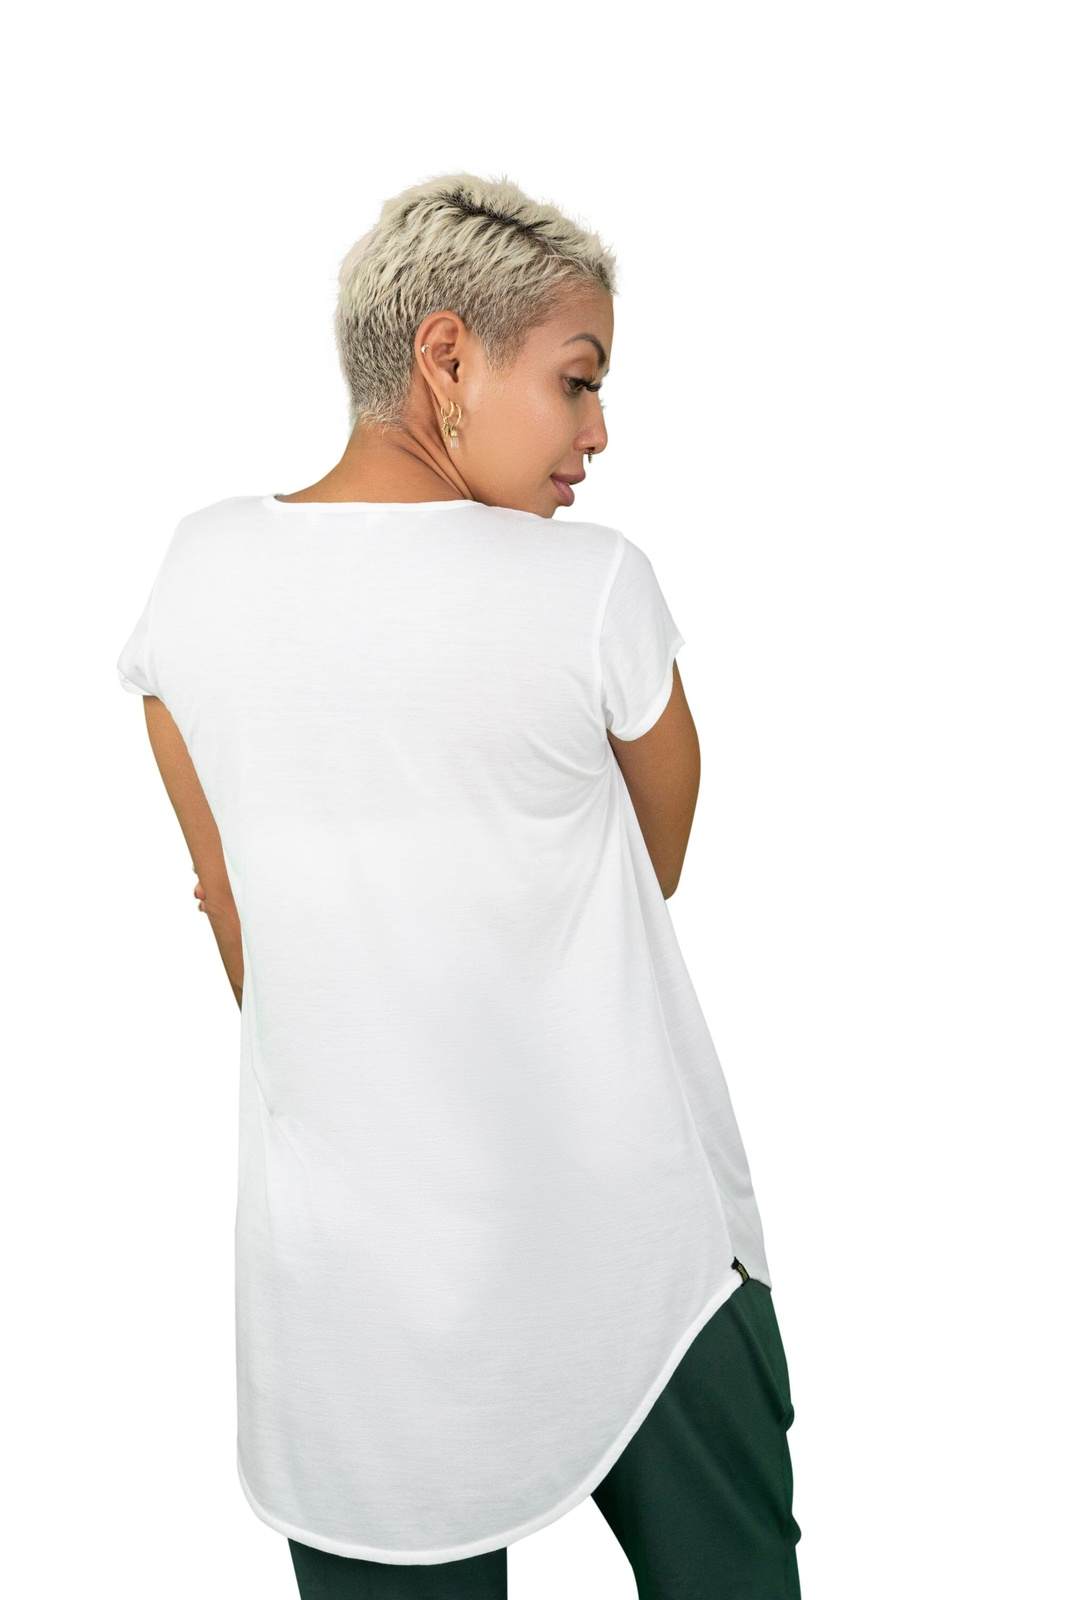 Womens Eco friendly white t shirt for sleep or streetwear by Ekoluxe Ethical Luxury Fashion Brand